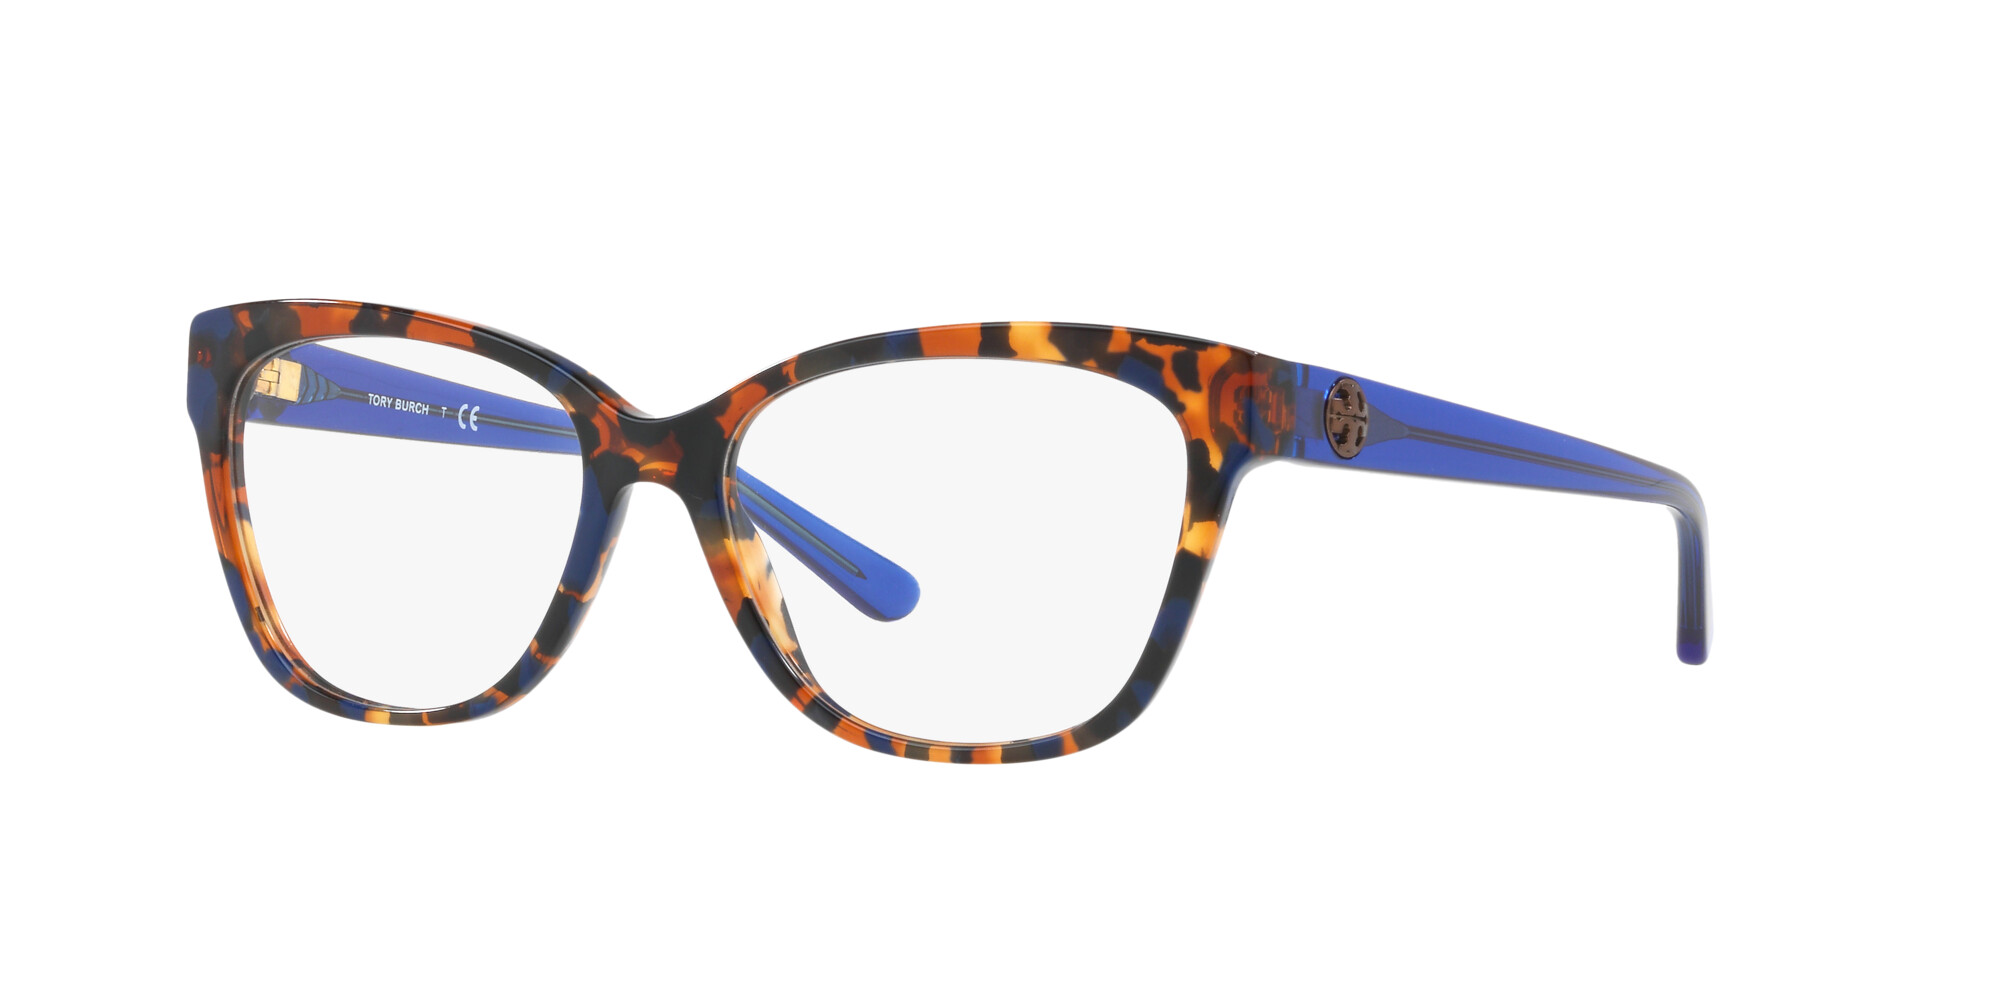 Angle_Left01 Tory Burch 0TY2079 1683 Brille Blau